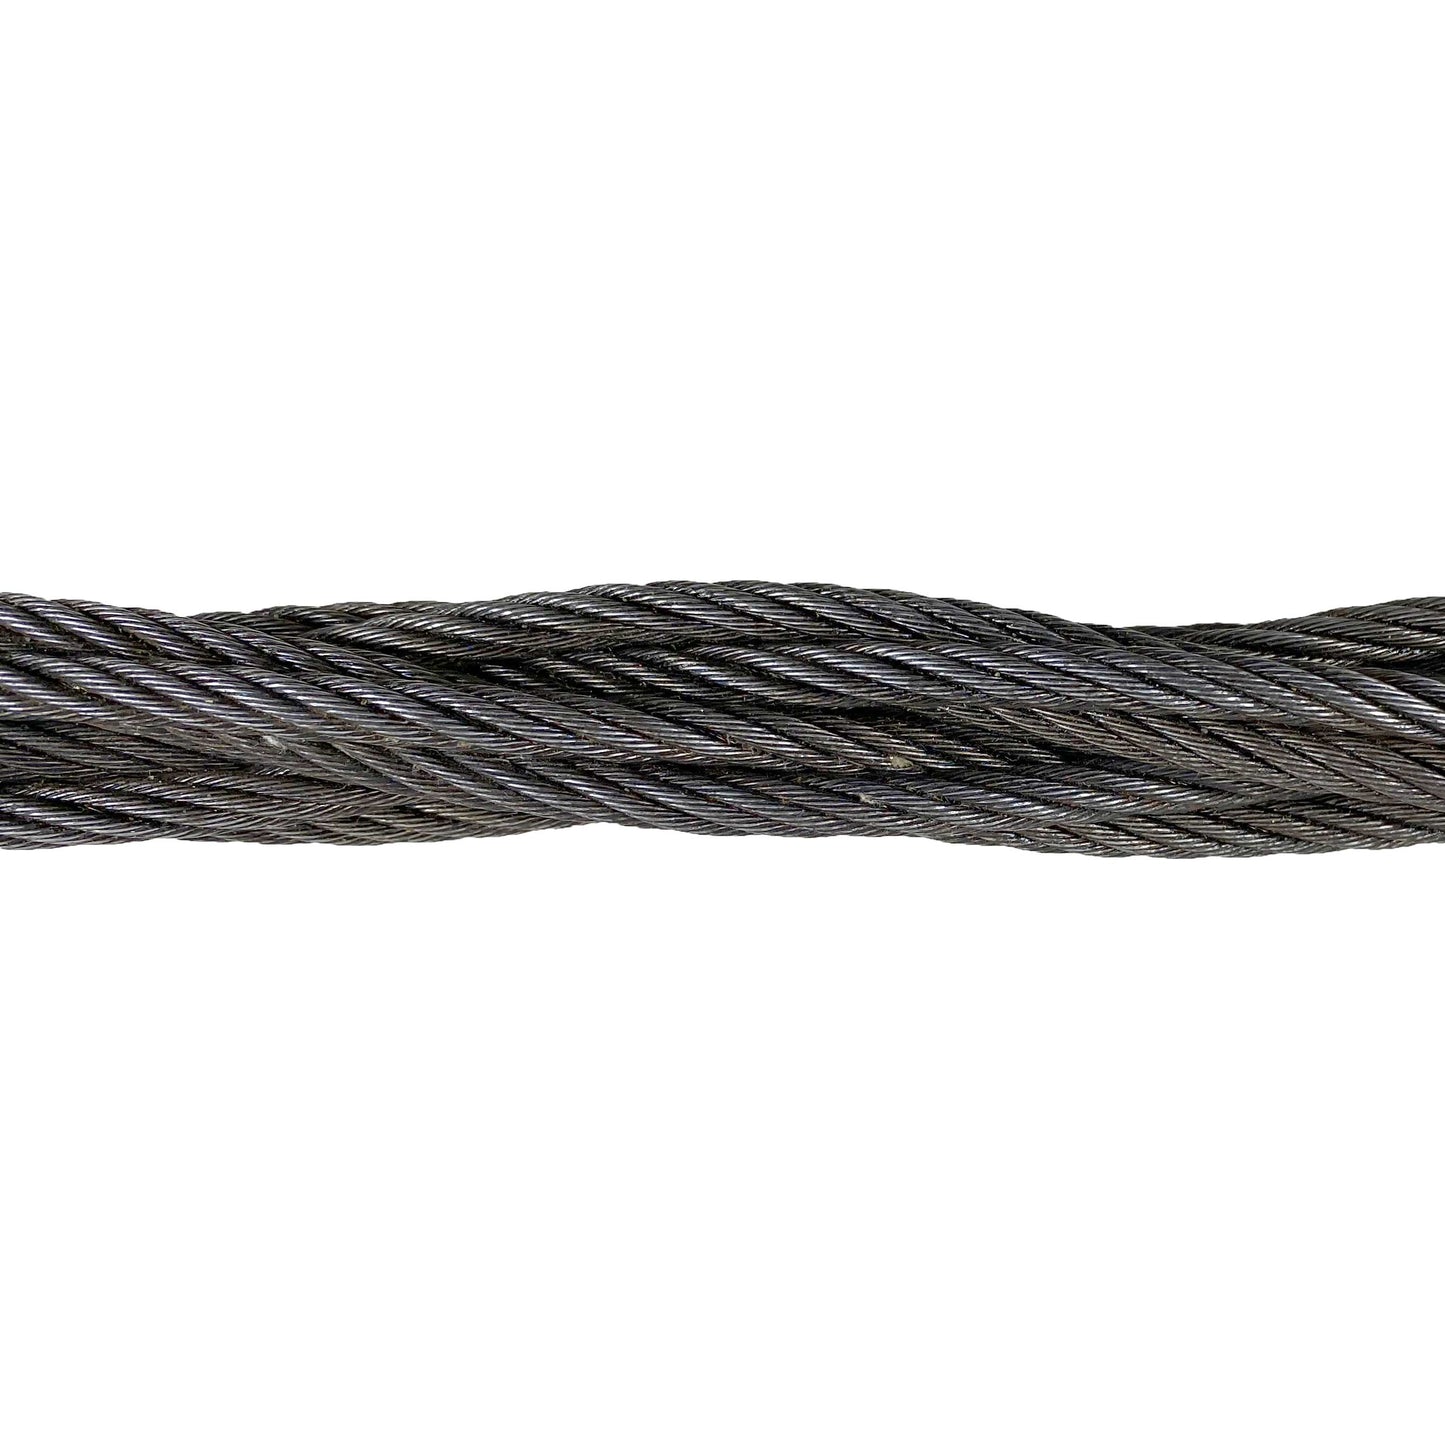 78 inch x 10 foot Nine Part Braided Wire Rope Sling image 3 of 3